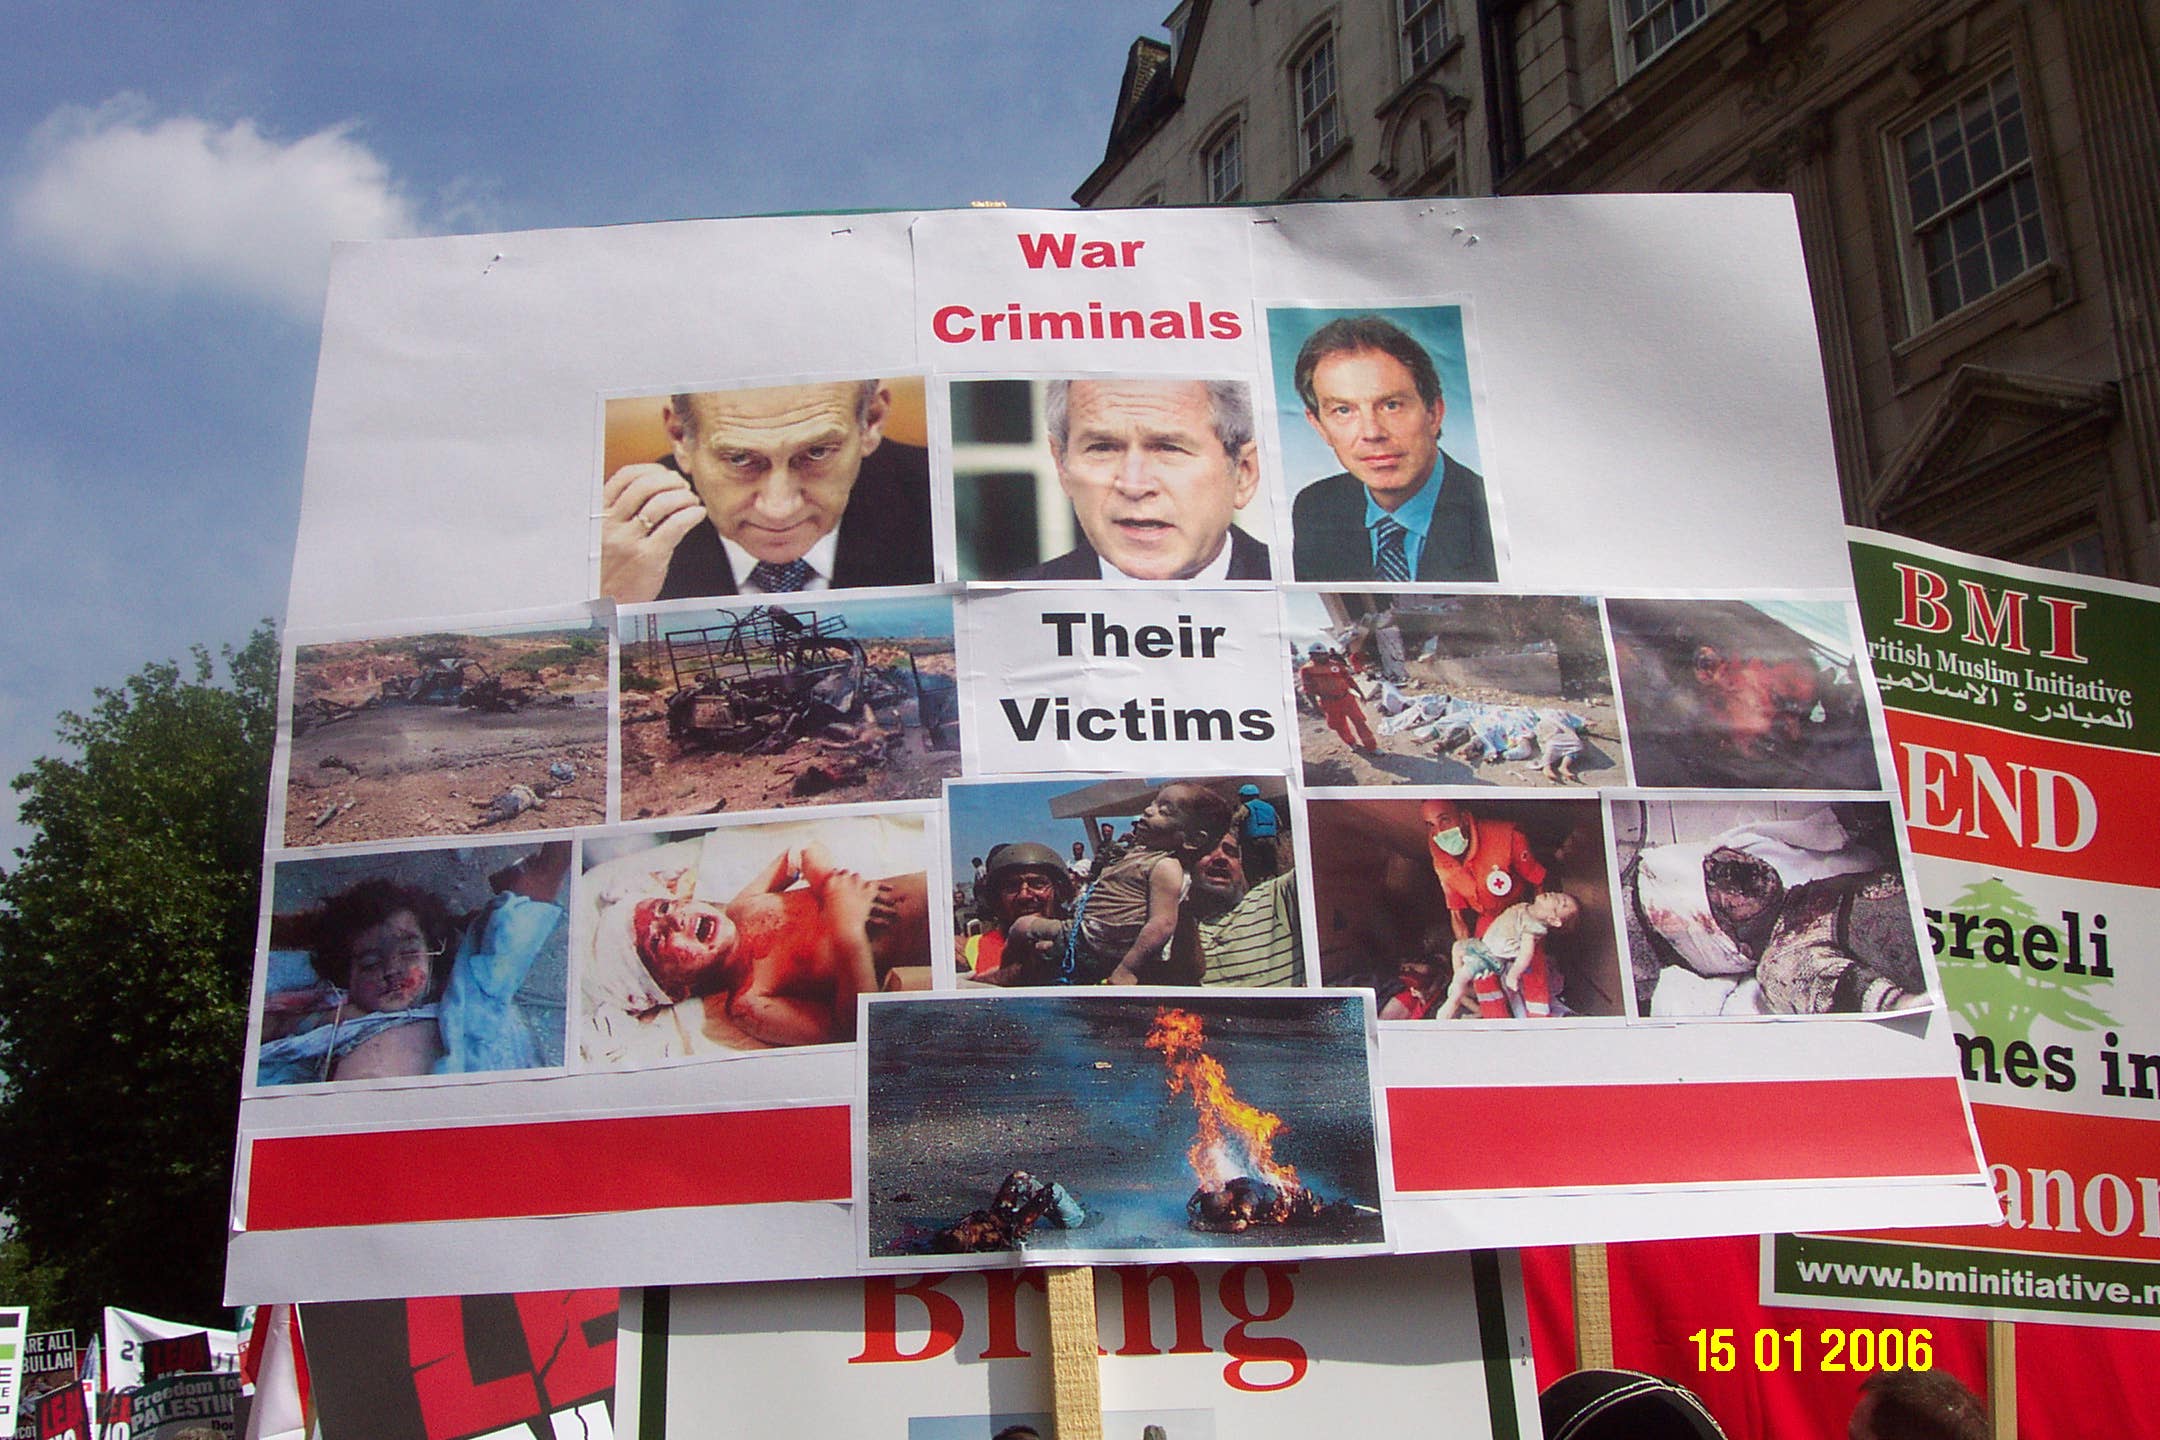 Bring the real war criminals to justice now